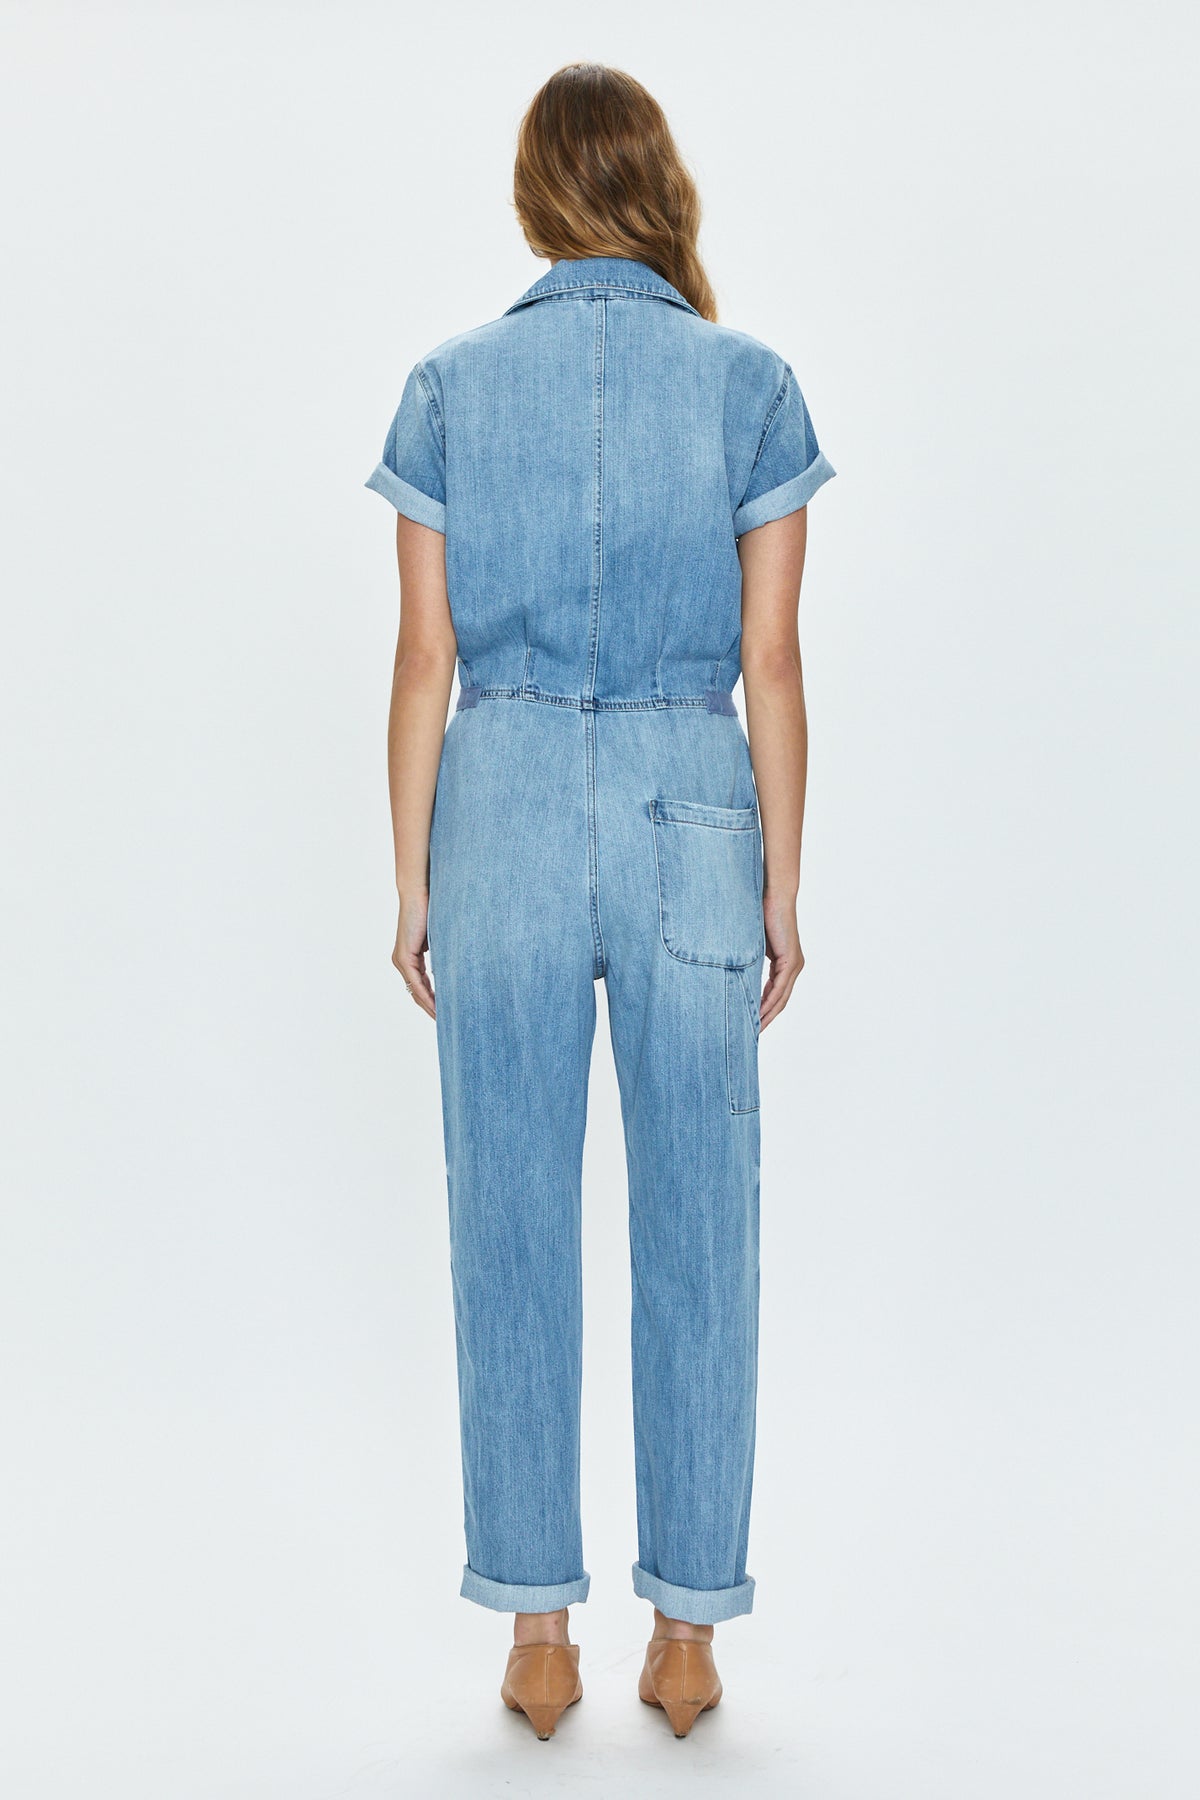 Grover Short Sleeve Field Suit - Disoriented